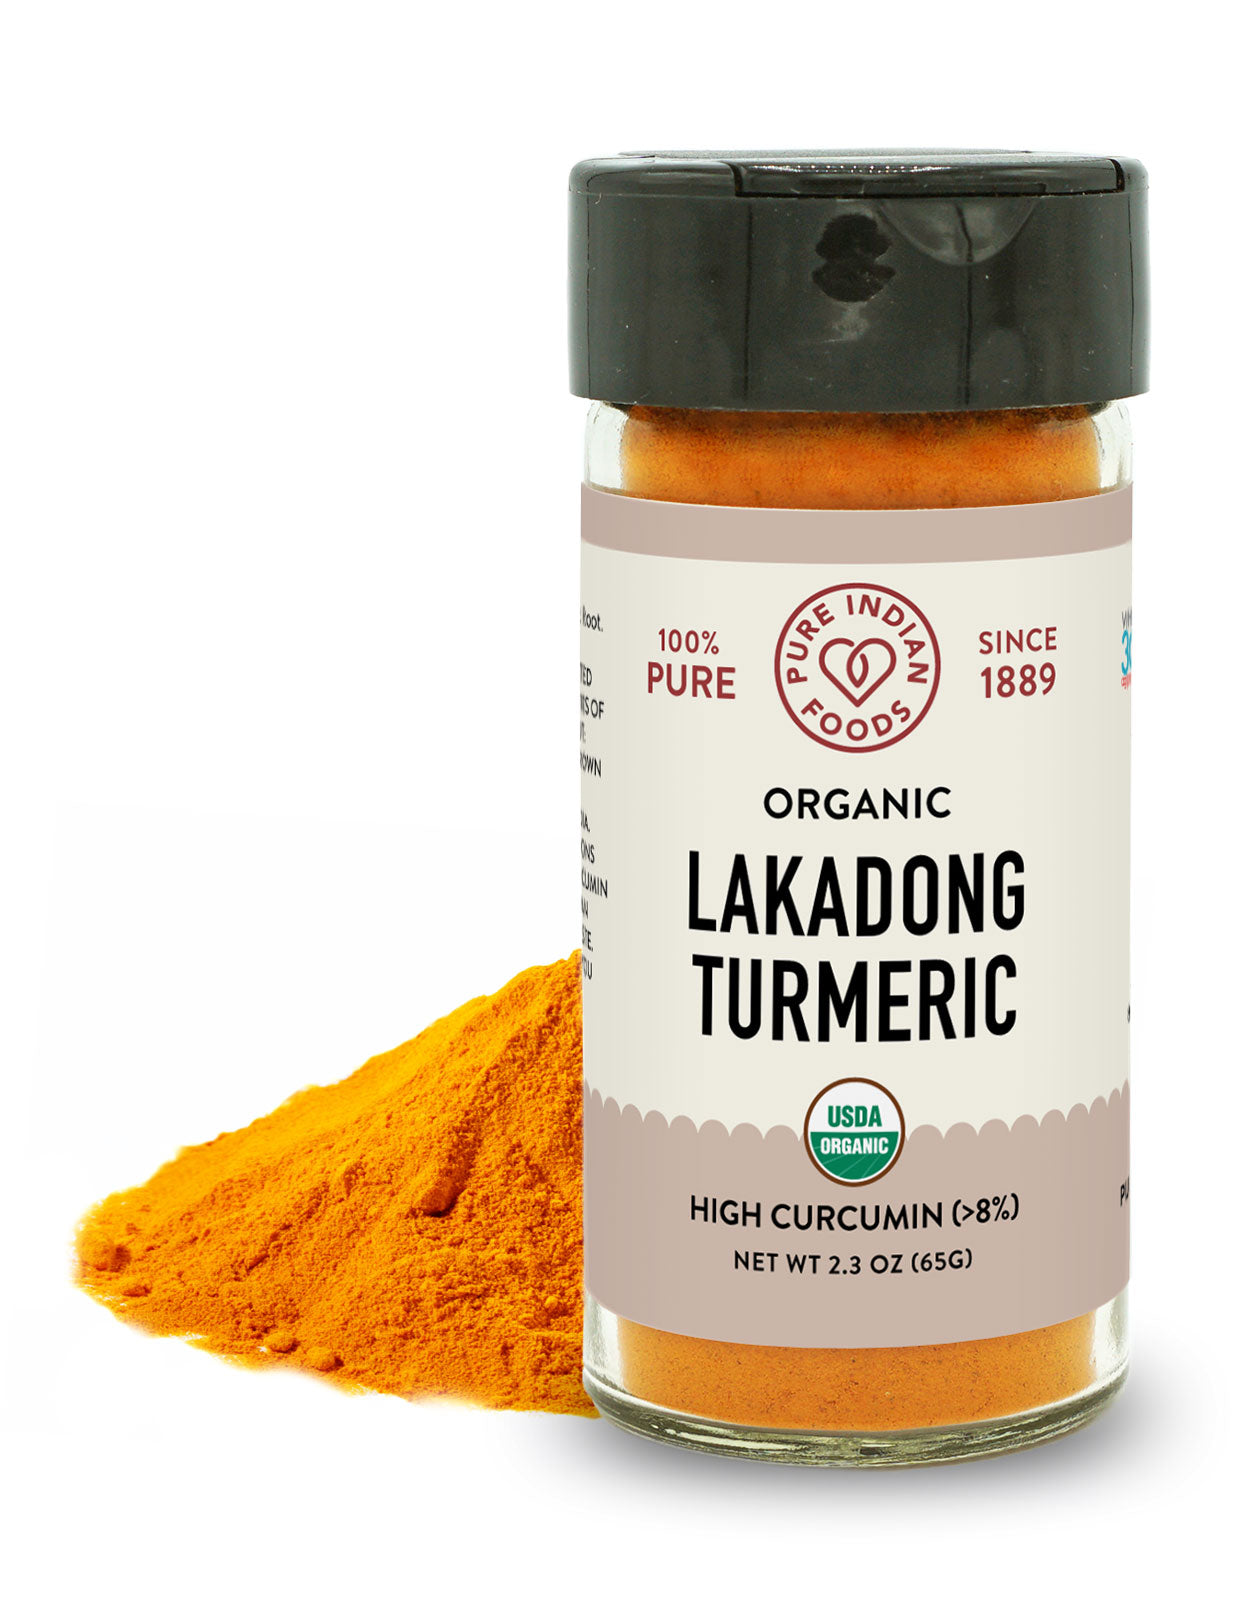 Jar of Pure Indian Foods 100% Pure Organic Lakadong Turumeric Powder. Label shows it's certified organic and is high curcumin tumeric with more than 8%.